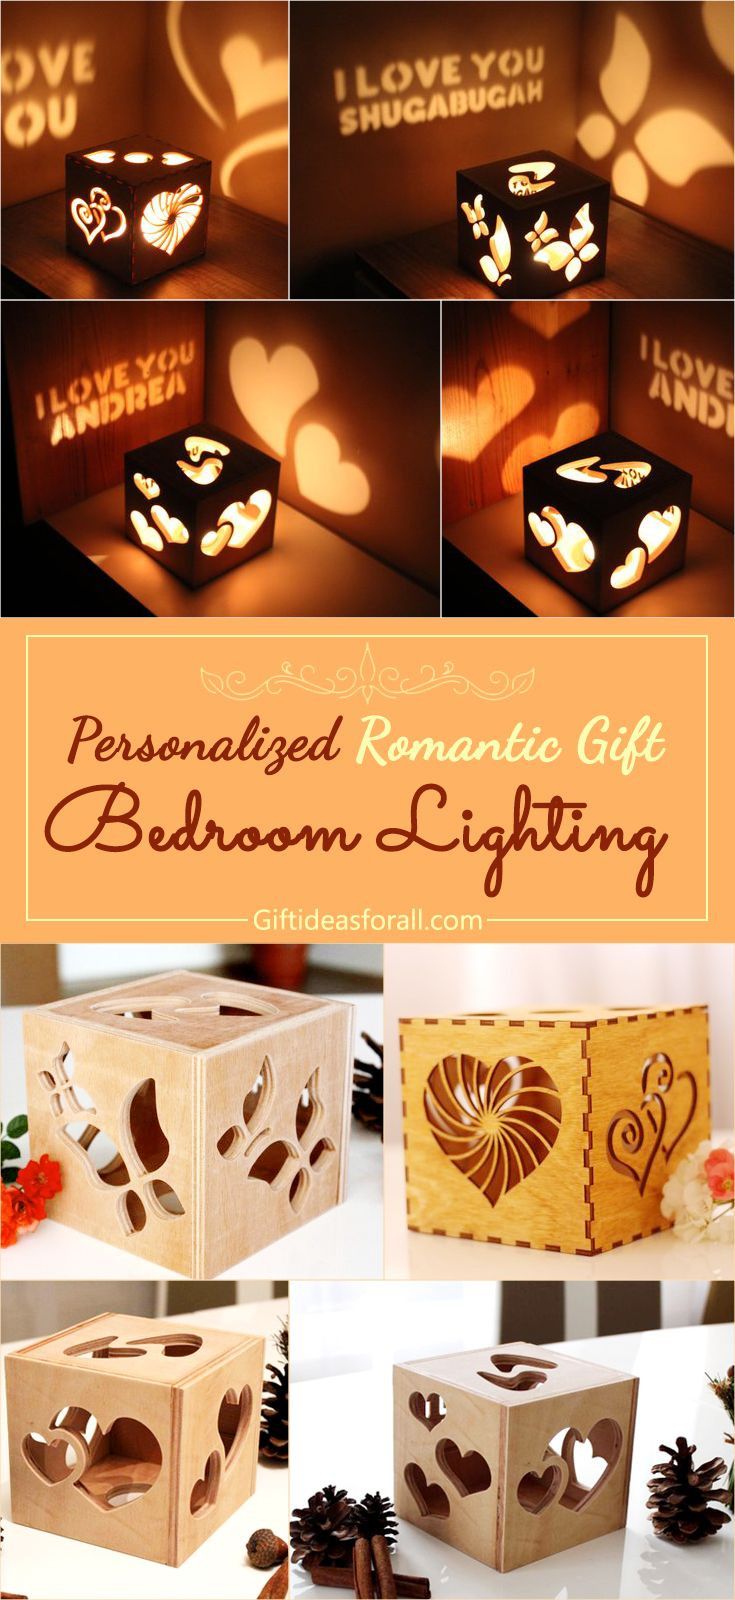 Girlfriend Birthday Gift Ideas Romantic
 Personalized romantic bedroom lighting Gifts Giftideas